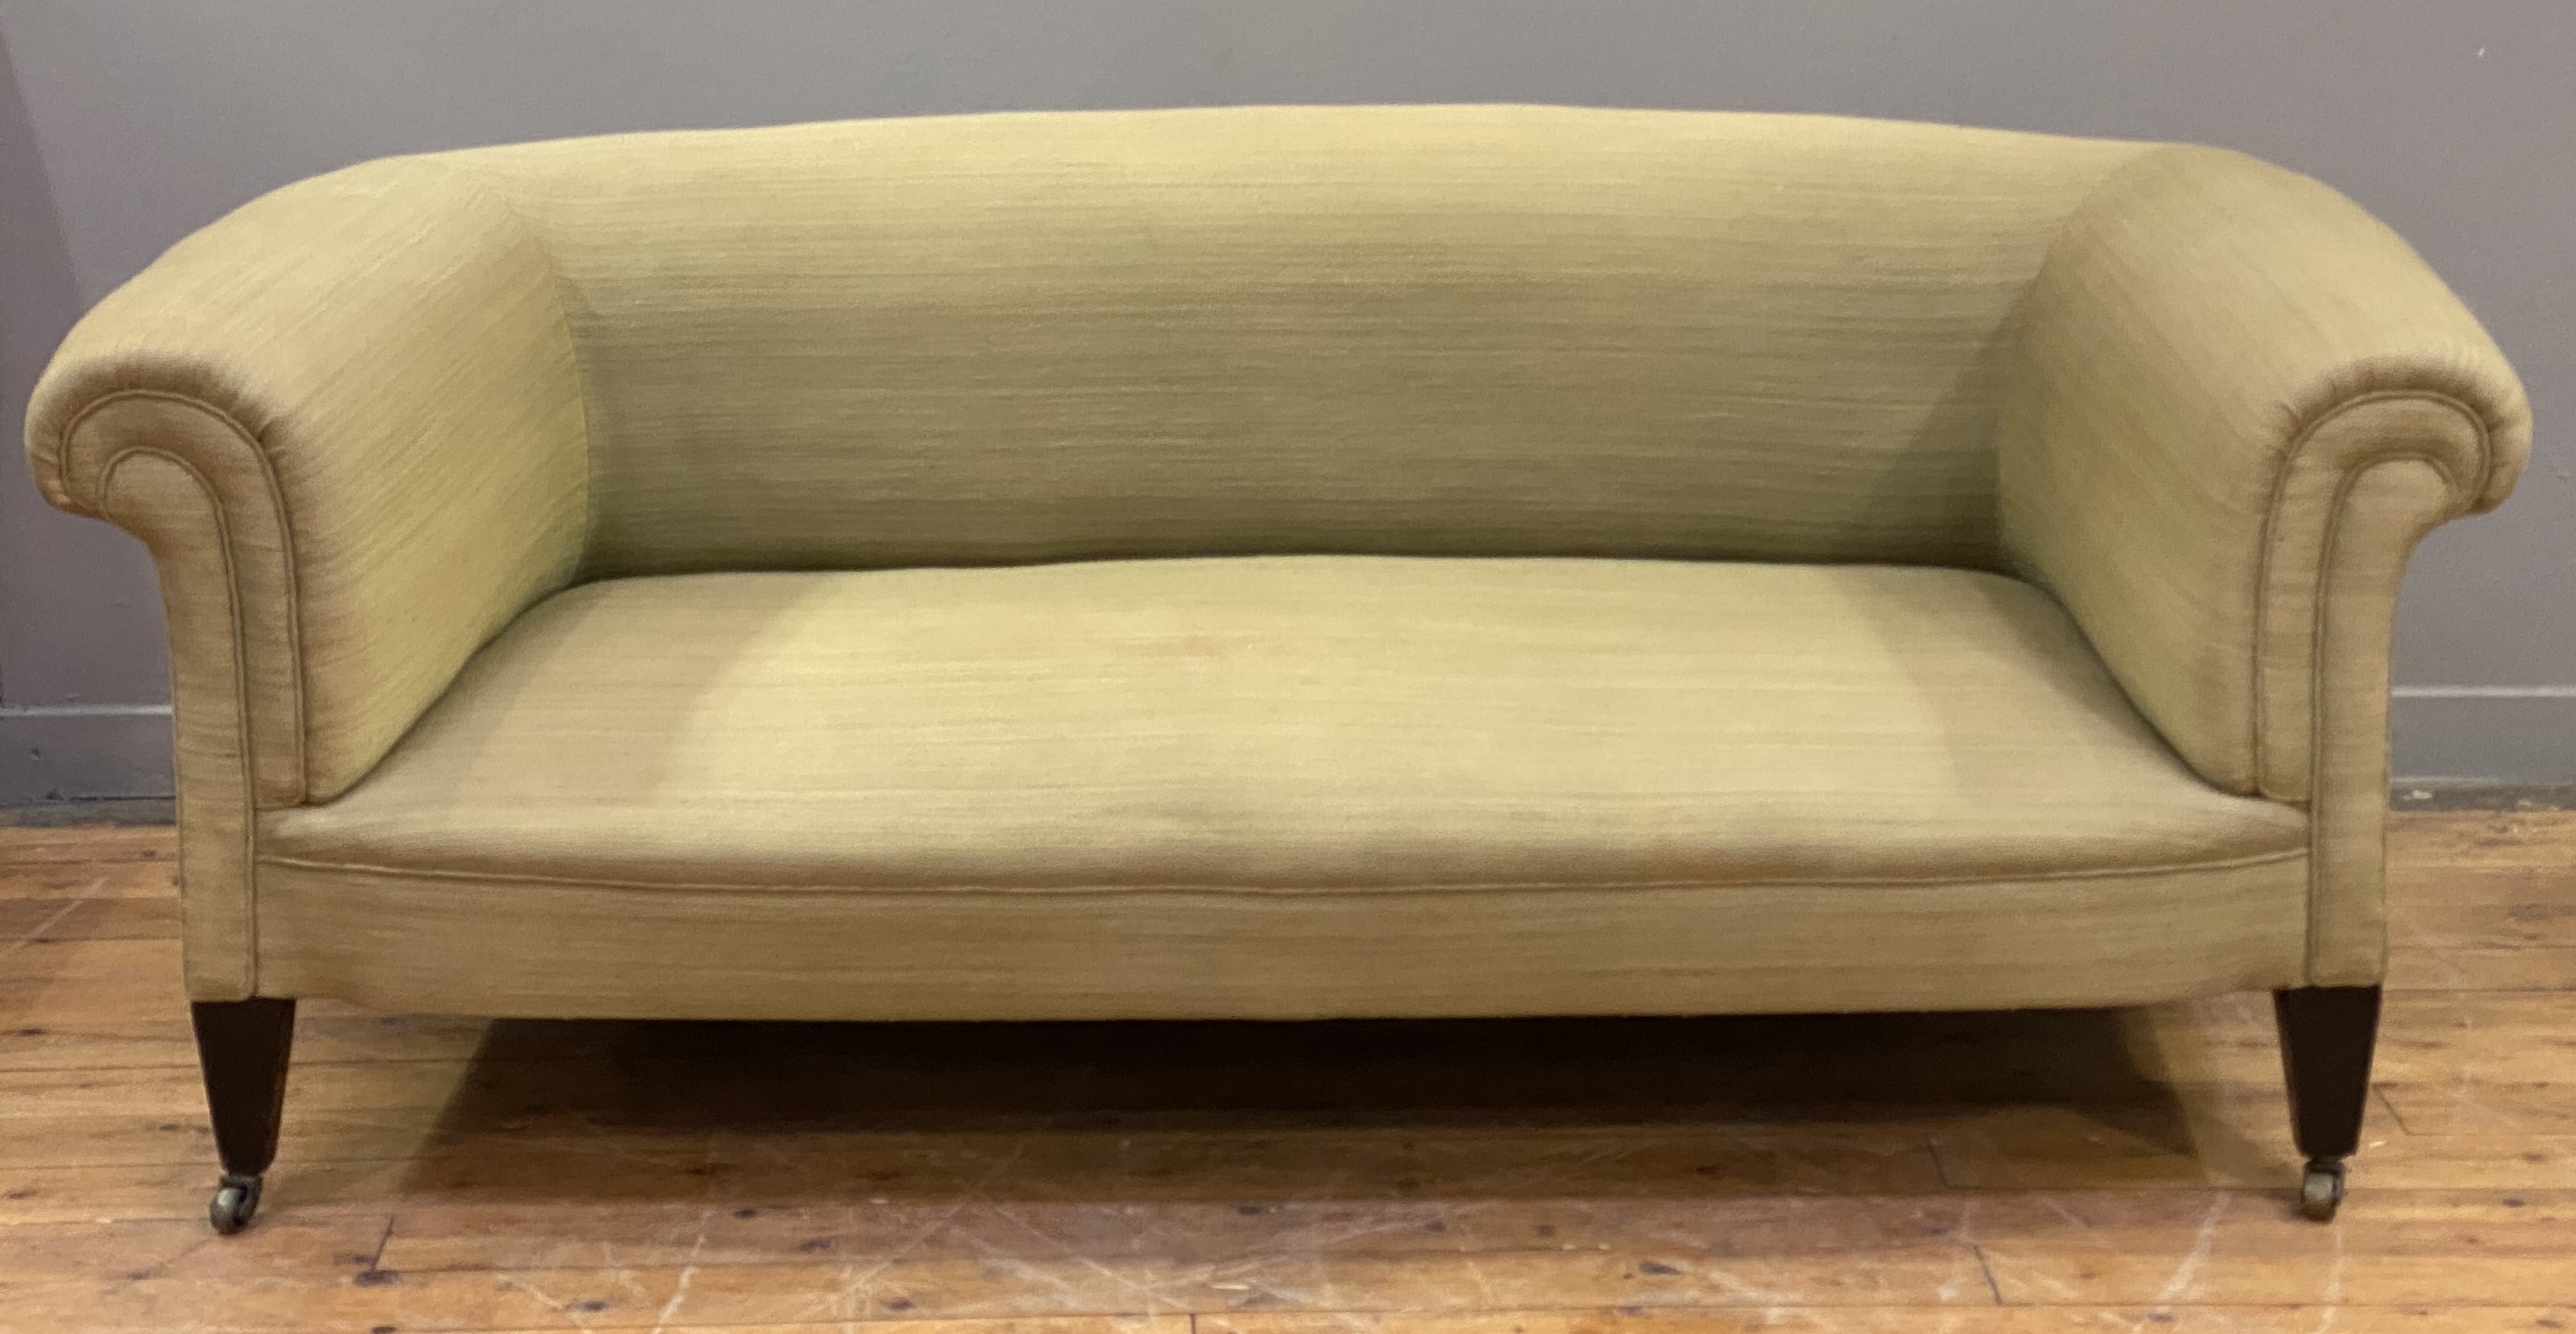 An Irish Chesterfield sofa, third quarter of the 19th century, well upholstered in sage green cotton - Image 2 of 2